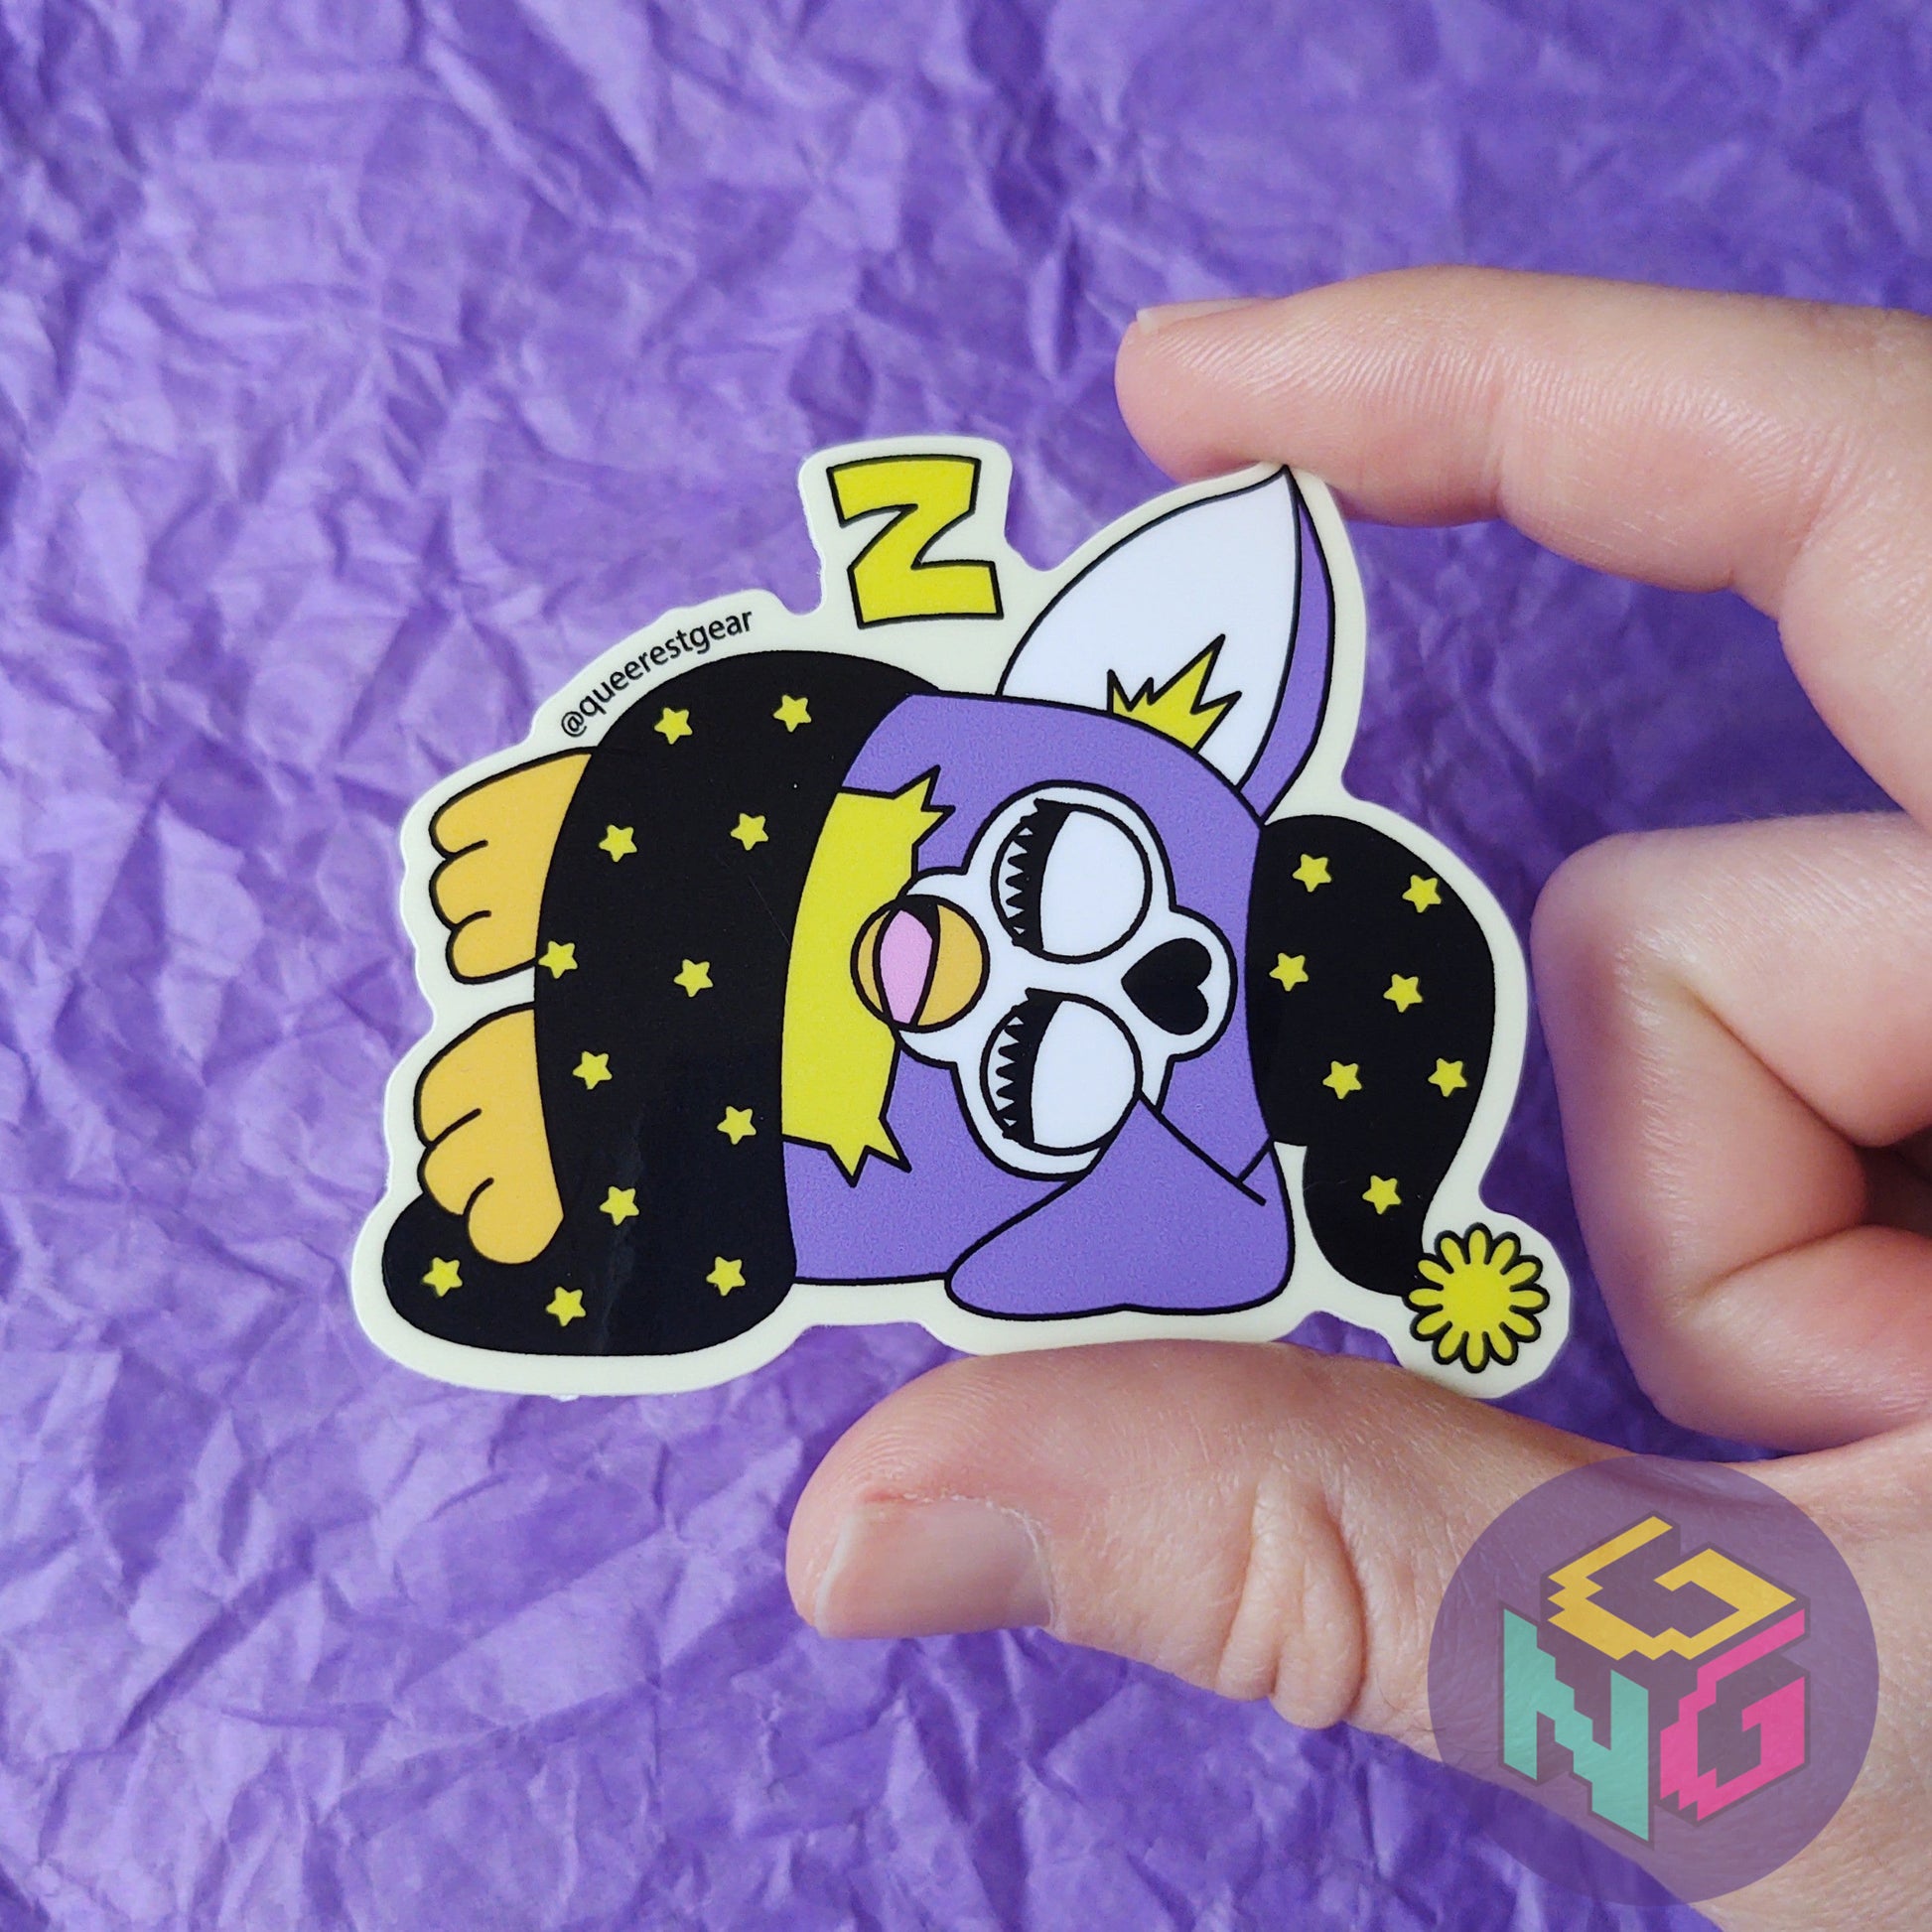 nonbinary furby sticker sleeping being held in a hand in front of a purple background